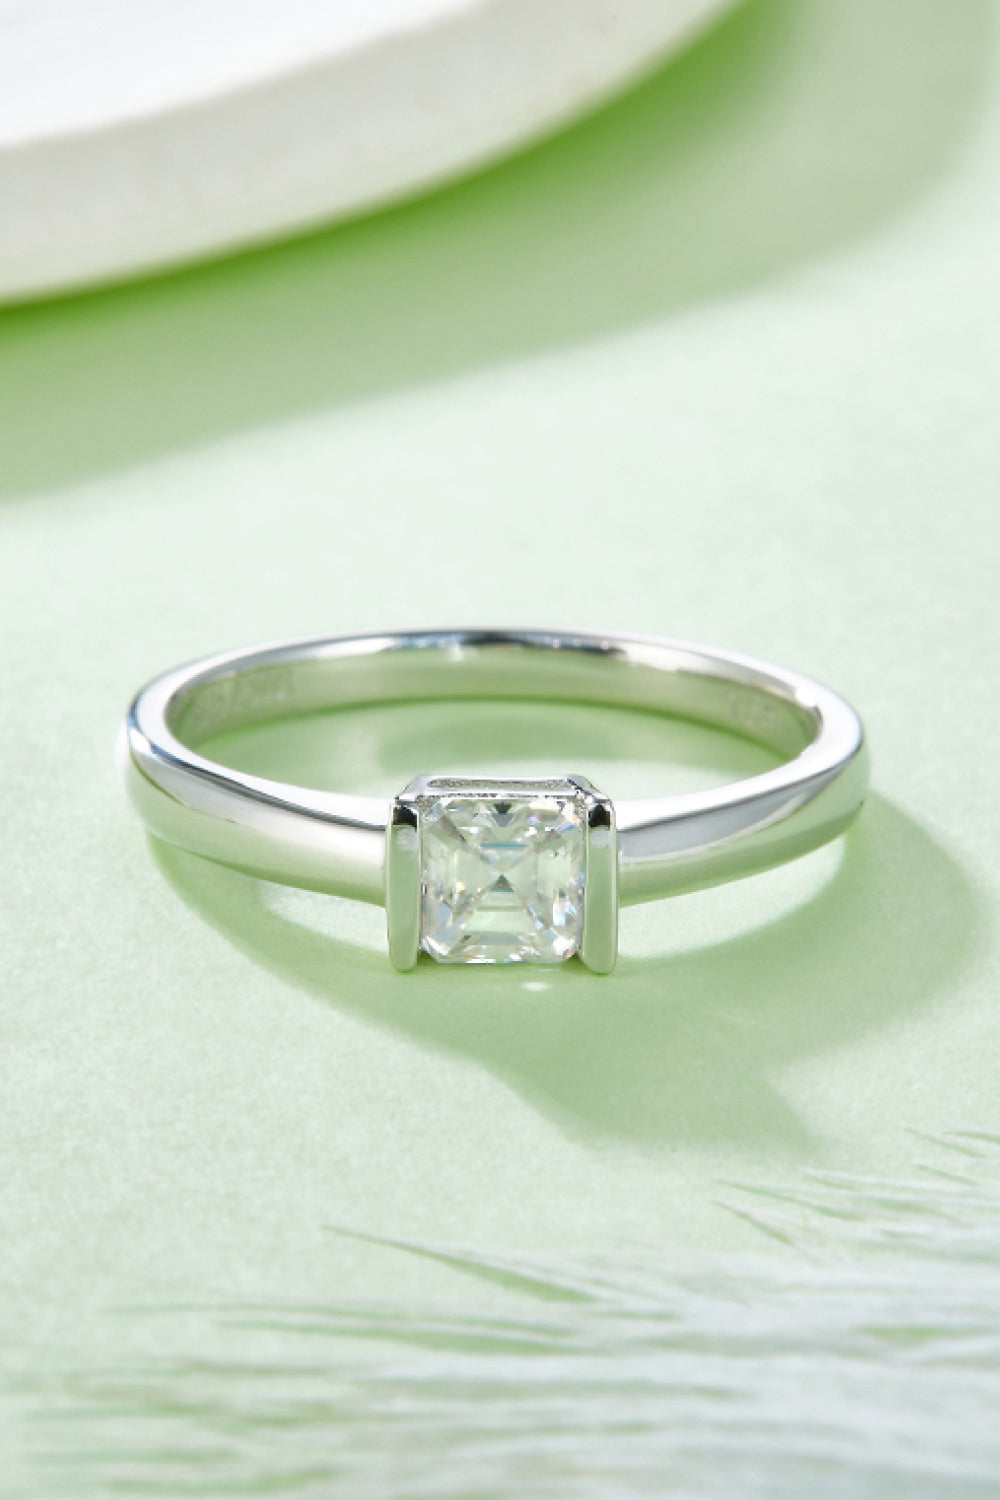 Moissanite 925 Sterling Silver Solitaire Ring king-general-store-5710.myshopify.com